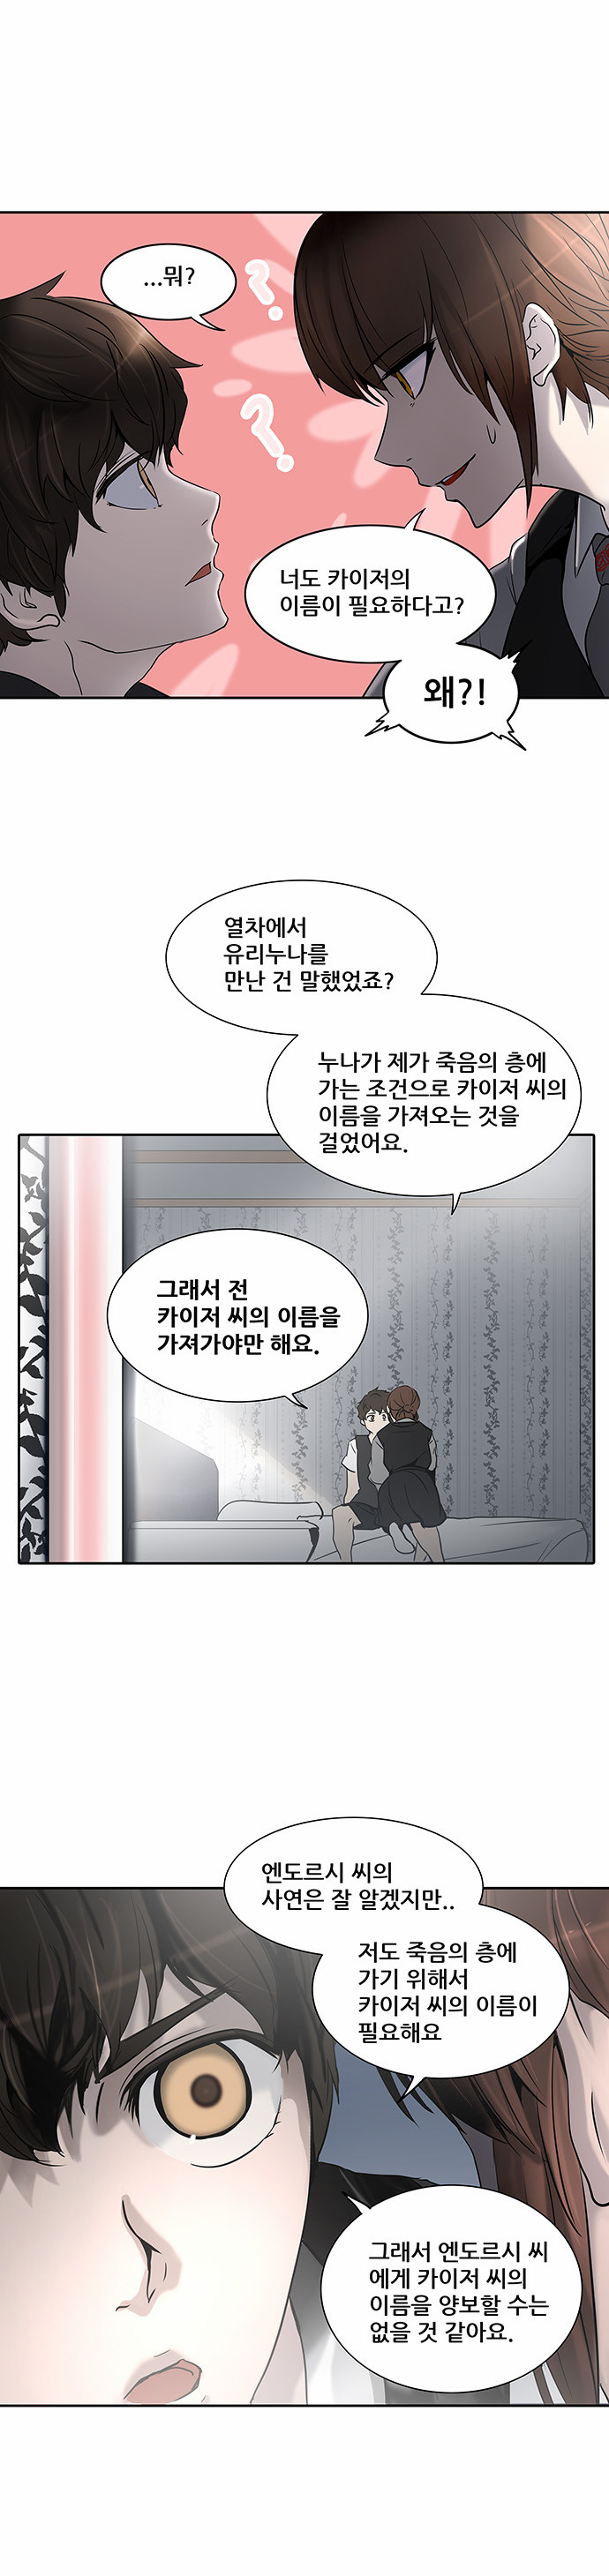 Tower of God - Chapter 288 - Page 1